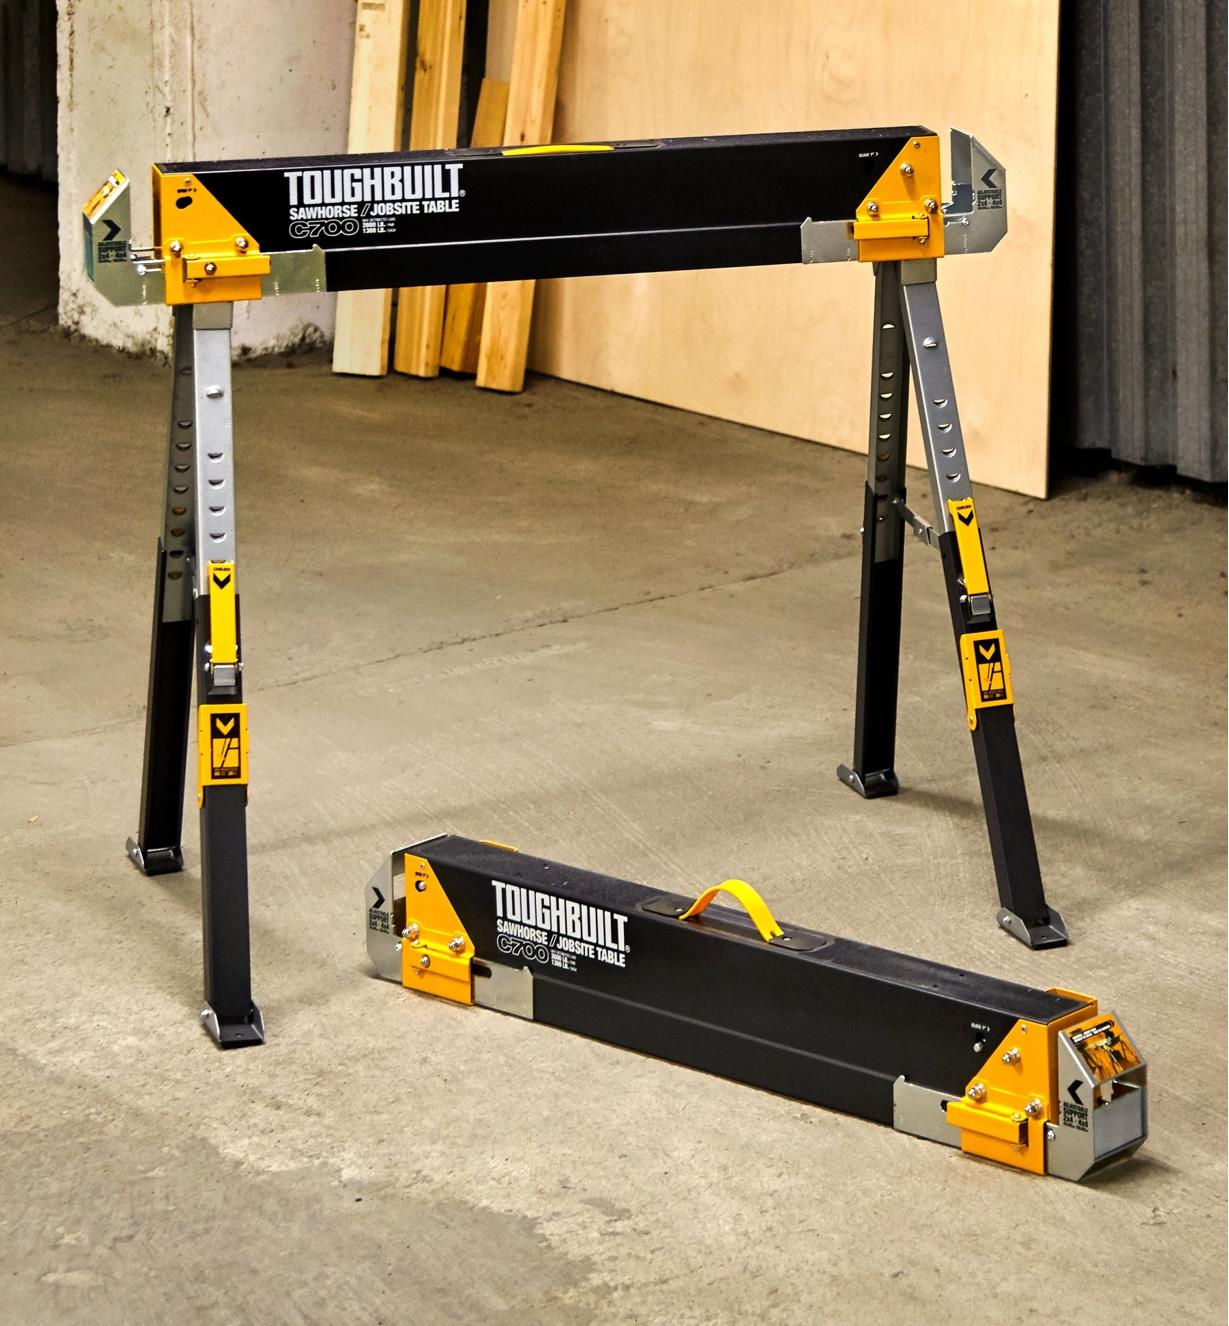 A pair of C700 sawhorses shown in a workshop, one ready for use, the other folded down for storage